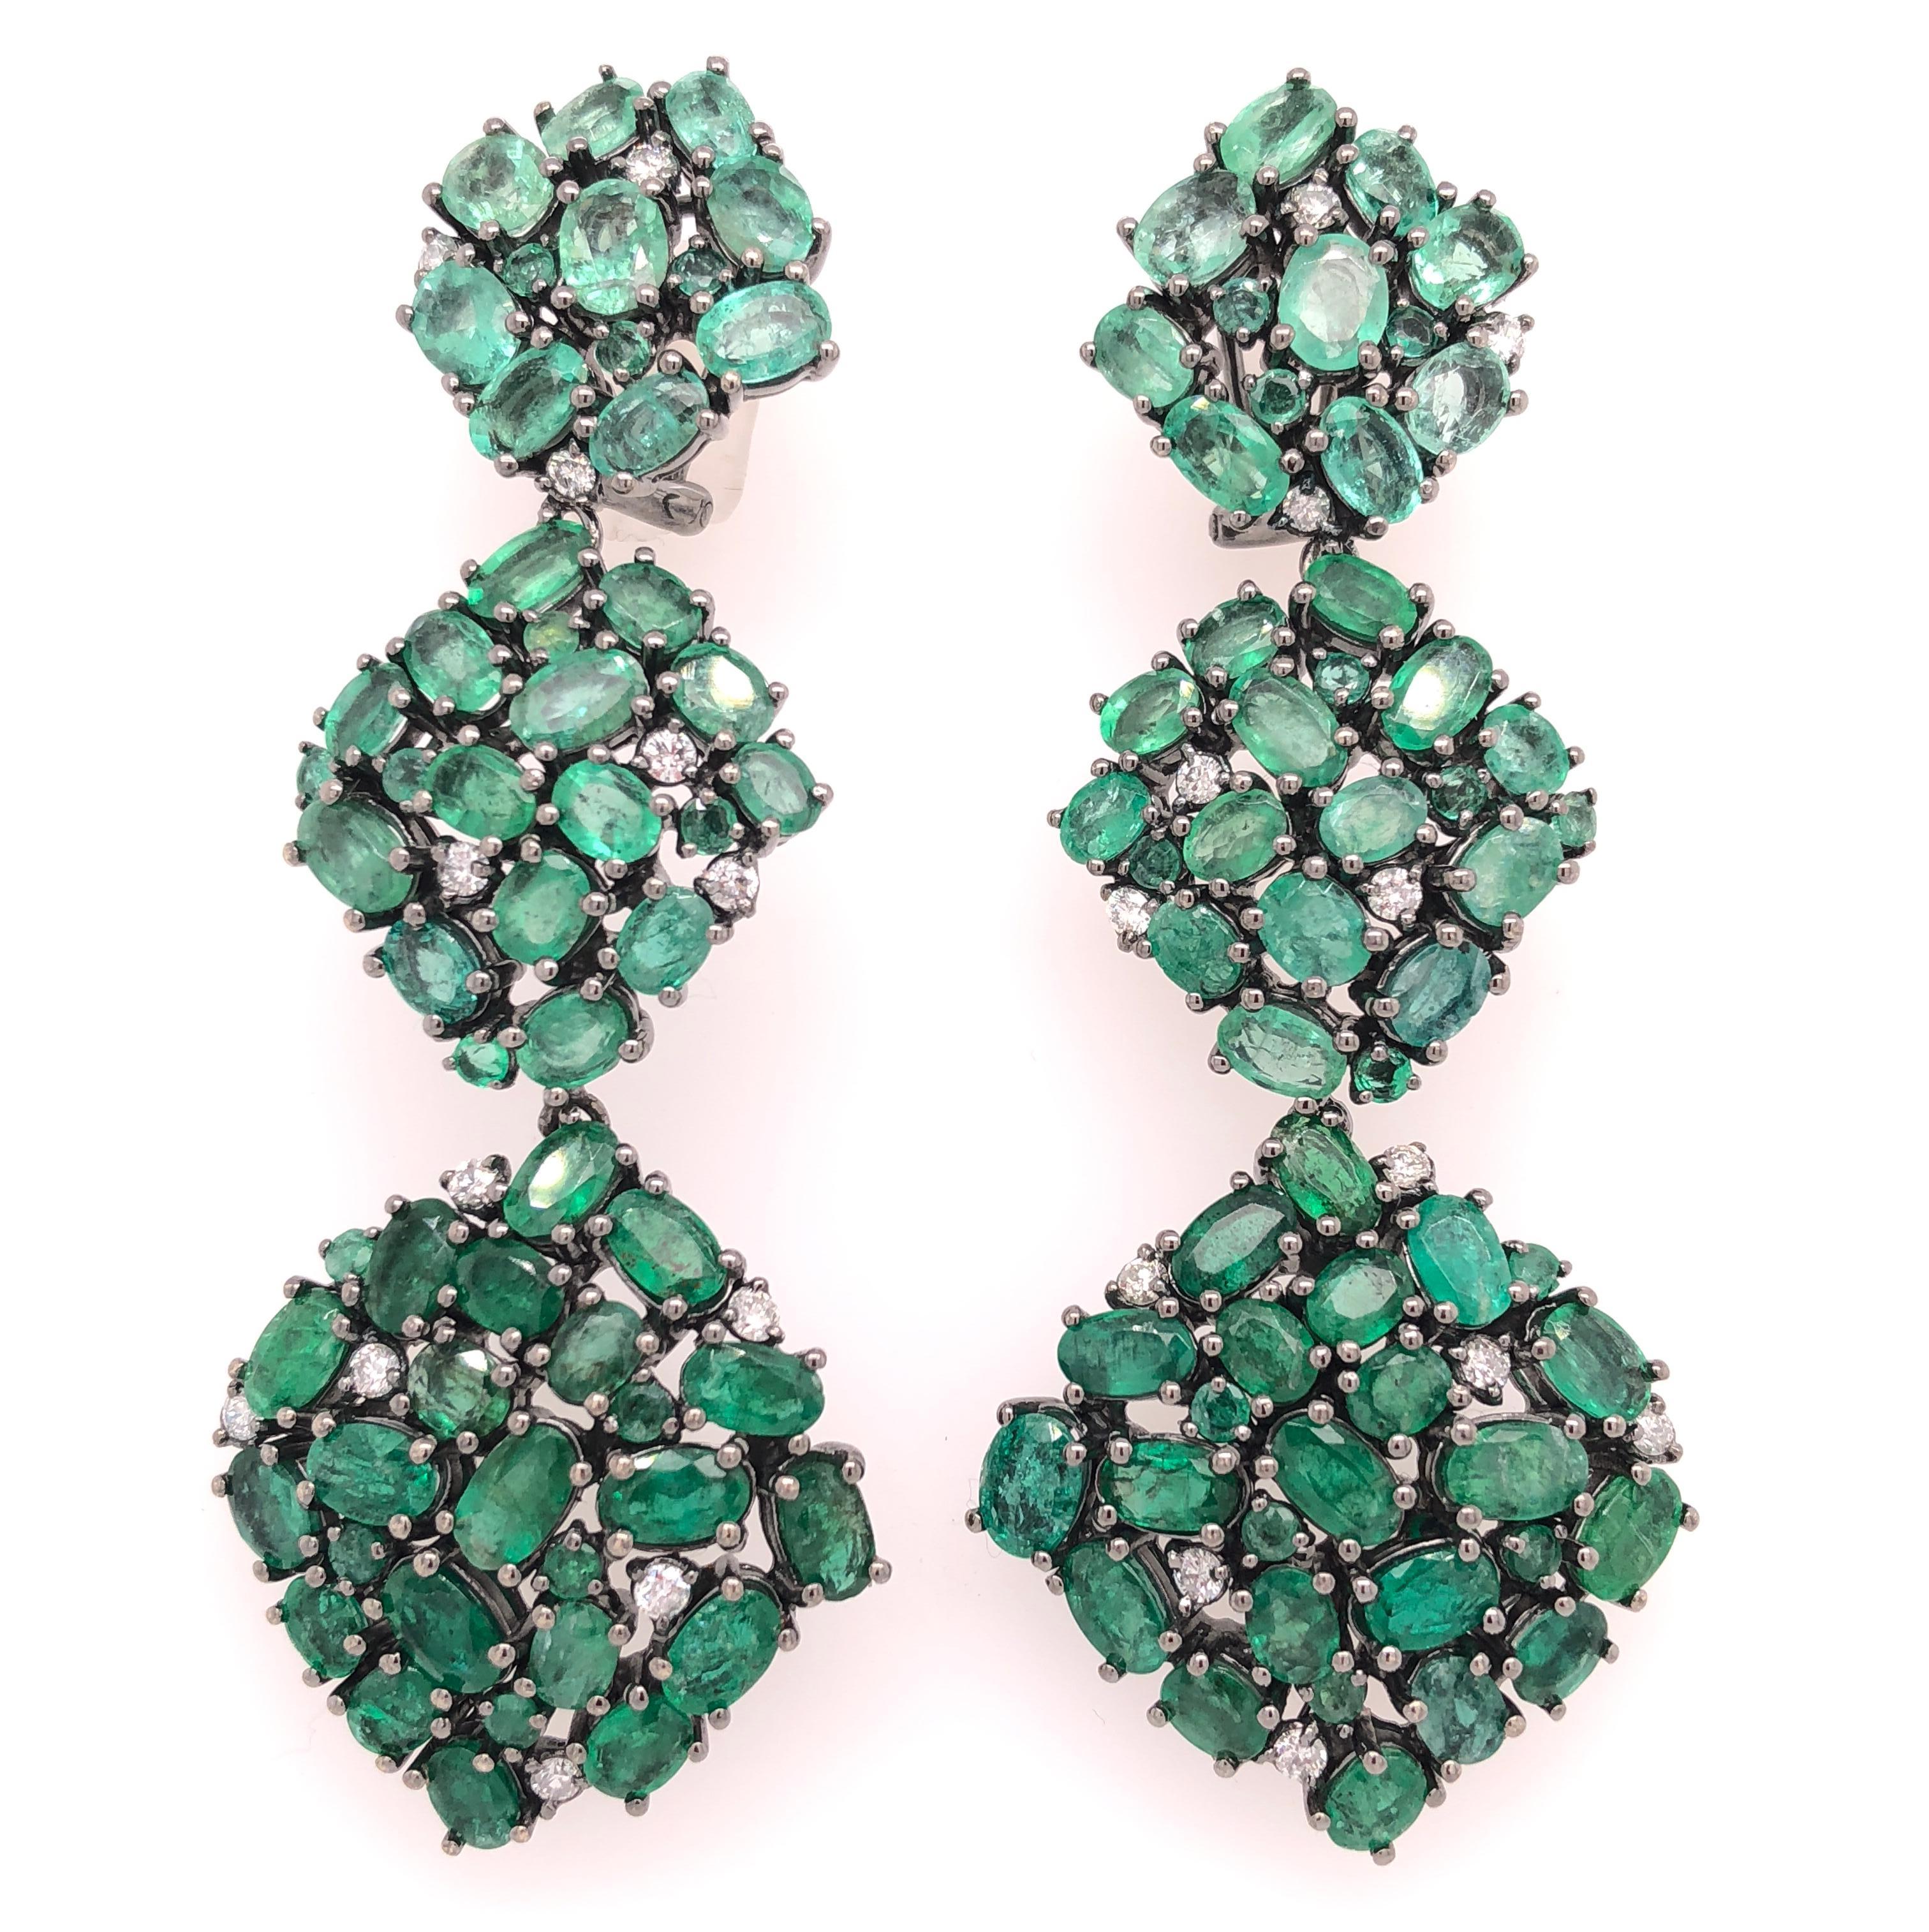 Green Lagoon Collection

Gradient Emerald and Diamond drop chandelier earrings set in 18K black rhodium gold. The Emeralds are set in a gradient style from lighter to darker from top to bottom.  

Emerald: 18.48ct total weight.
Diamonds: 0.56ct